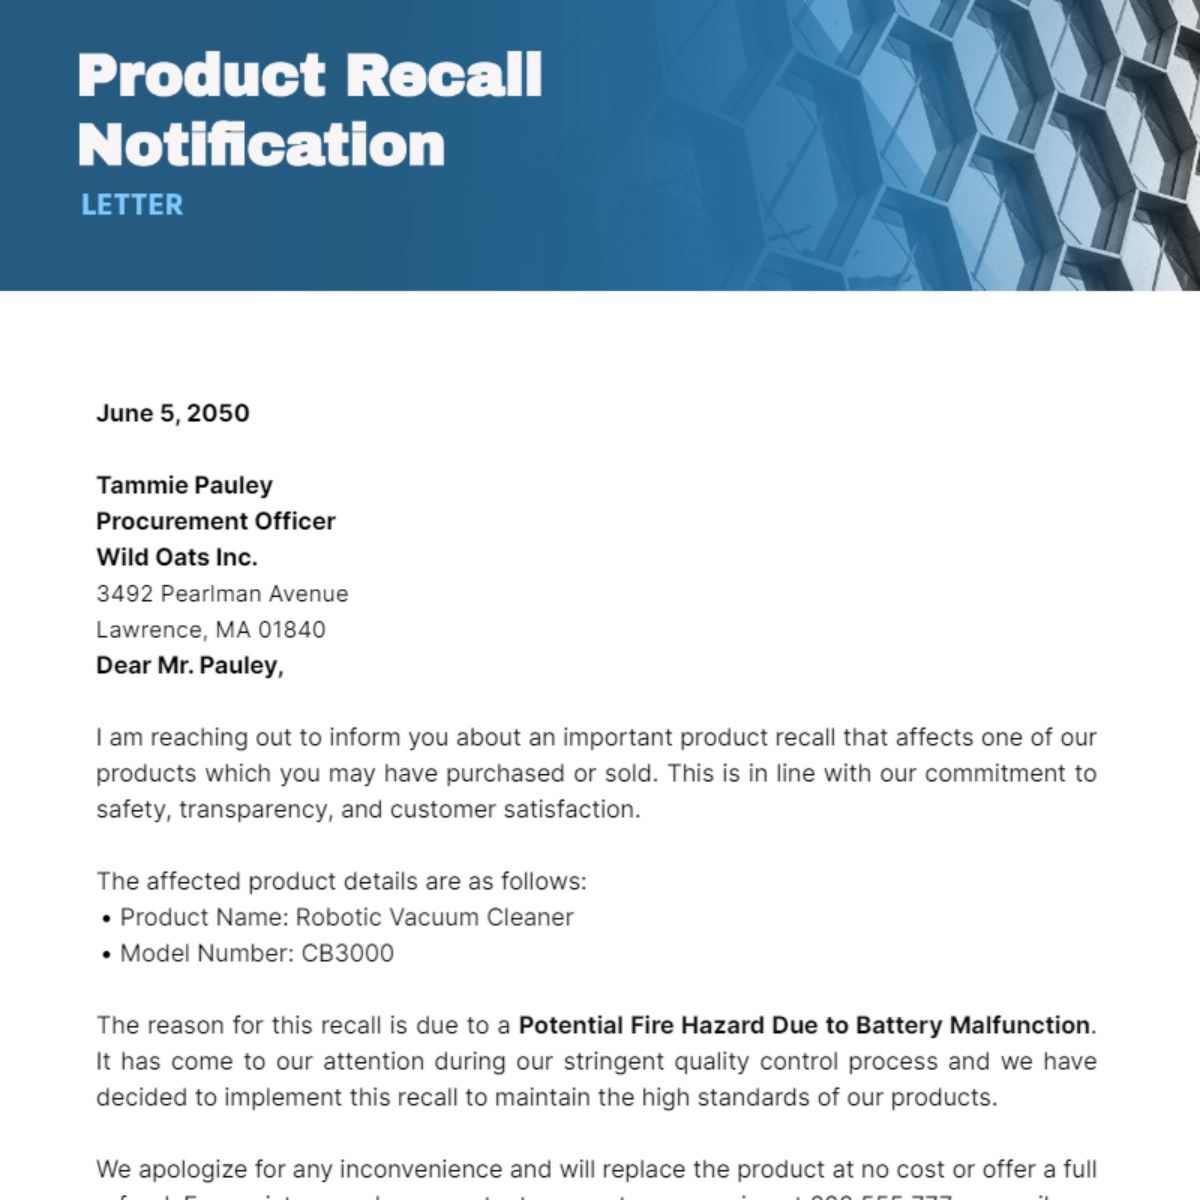 Product Recall Notification Letter Template